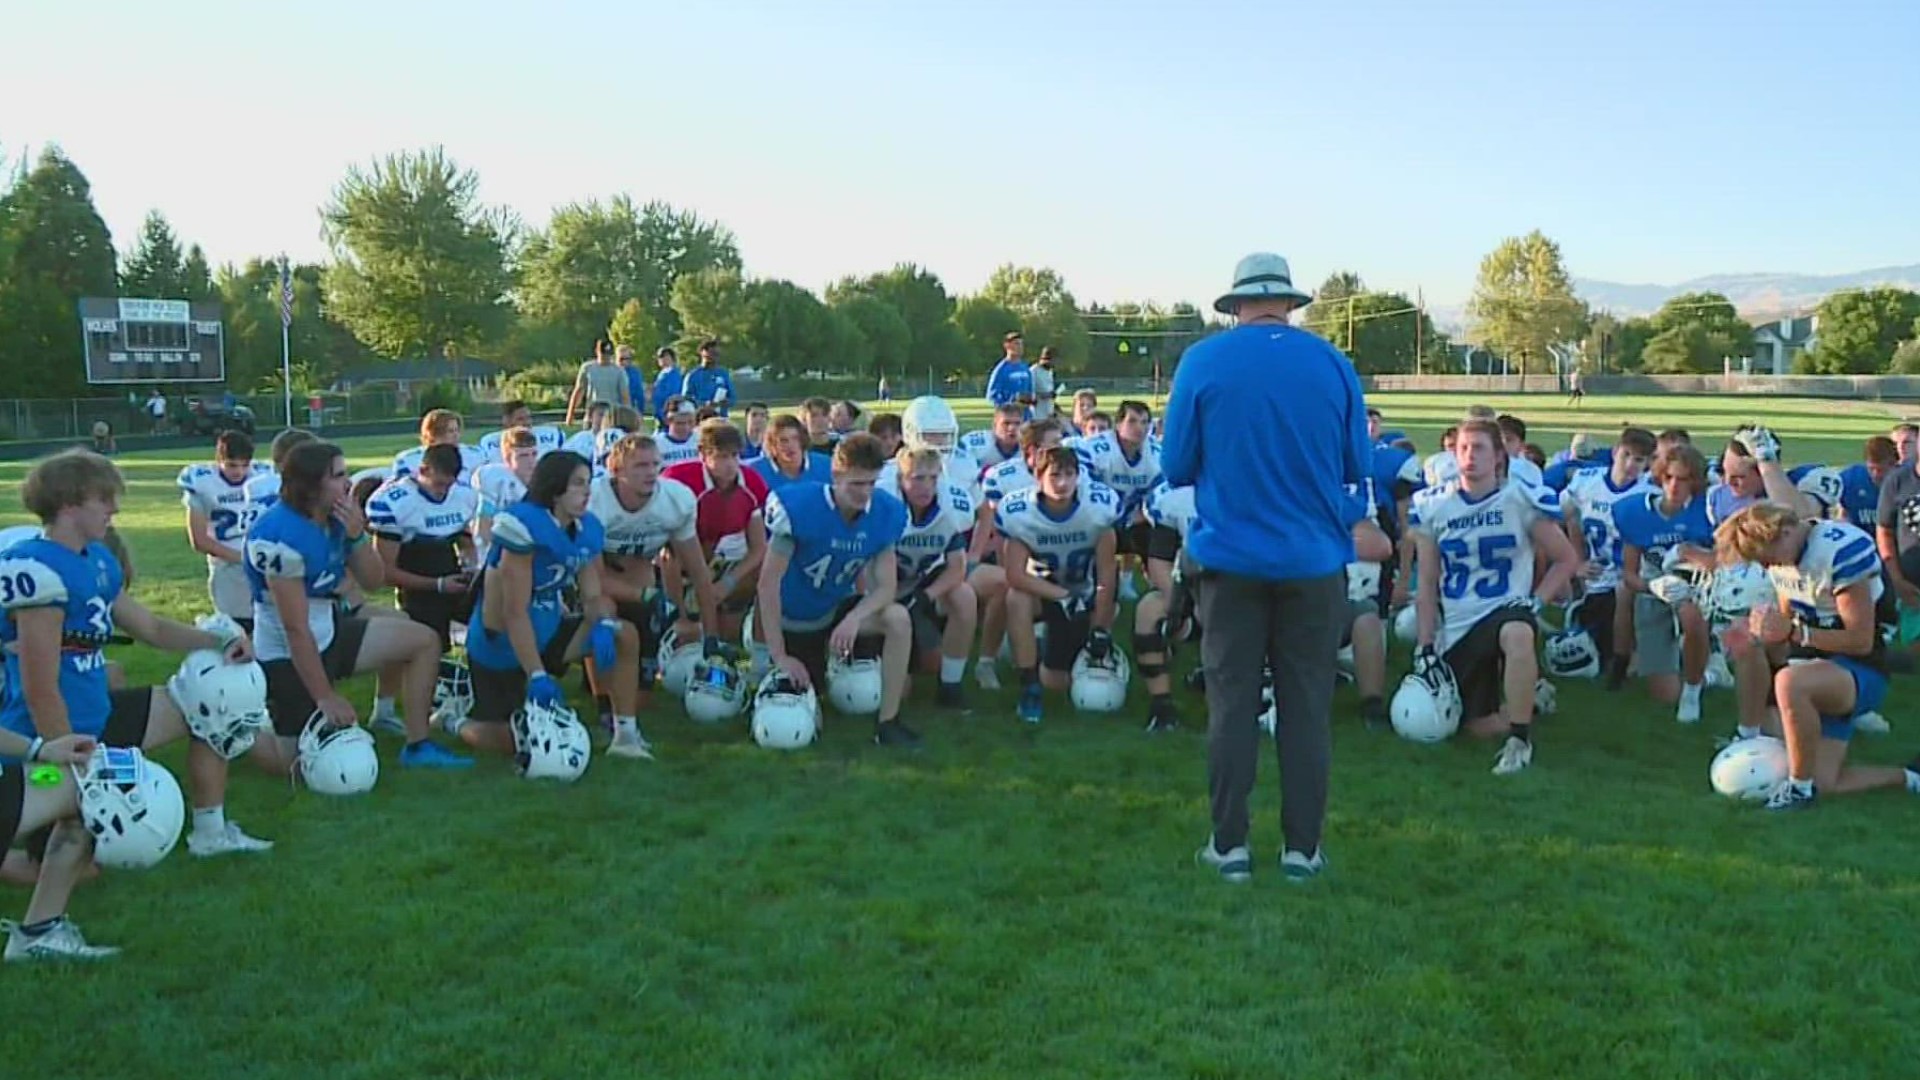 Starting off with rivalry week for season kick off, the timberline wolves prepare for their Saturday game against the Boise Brave.